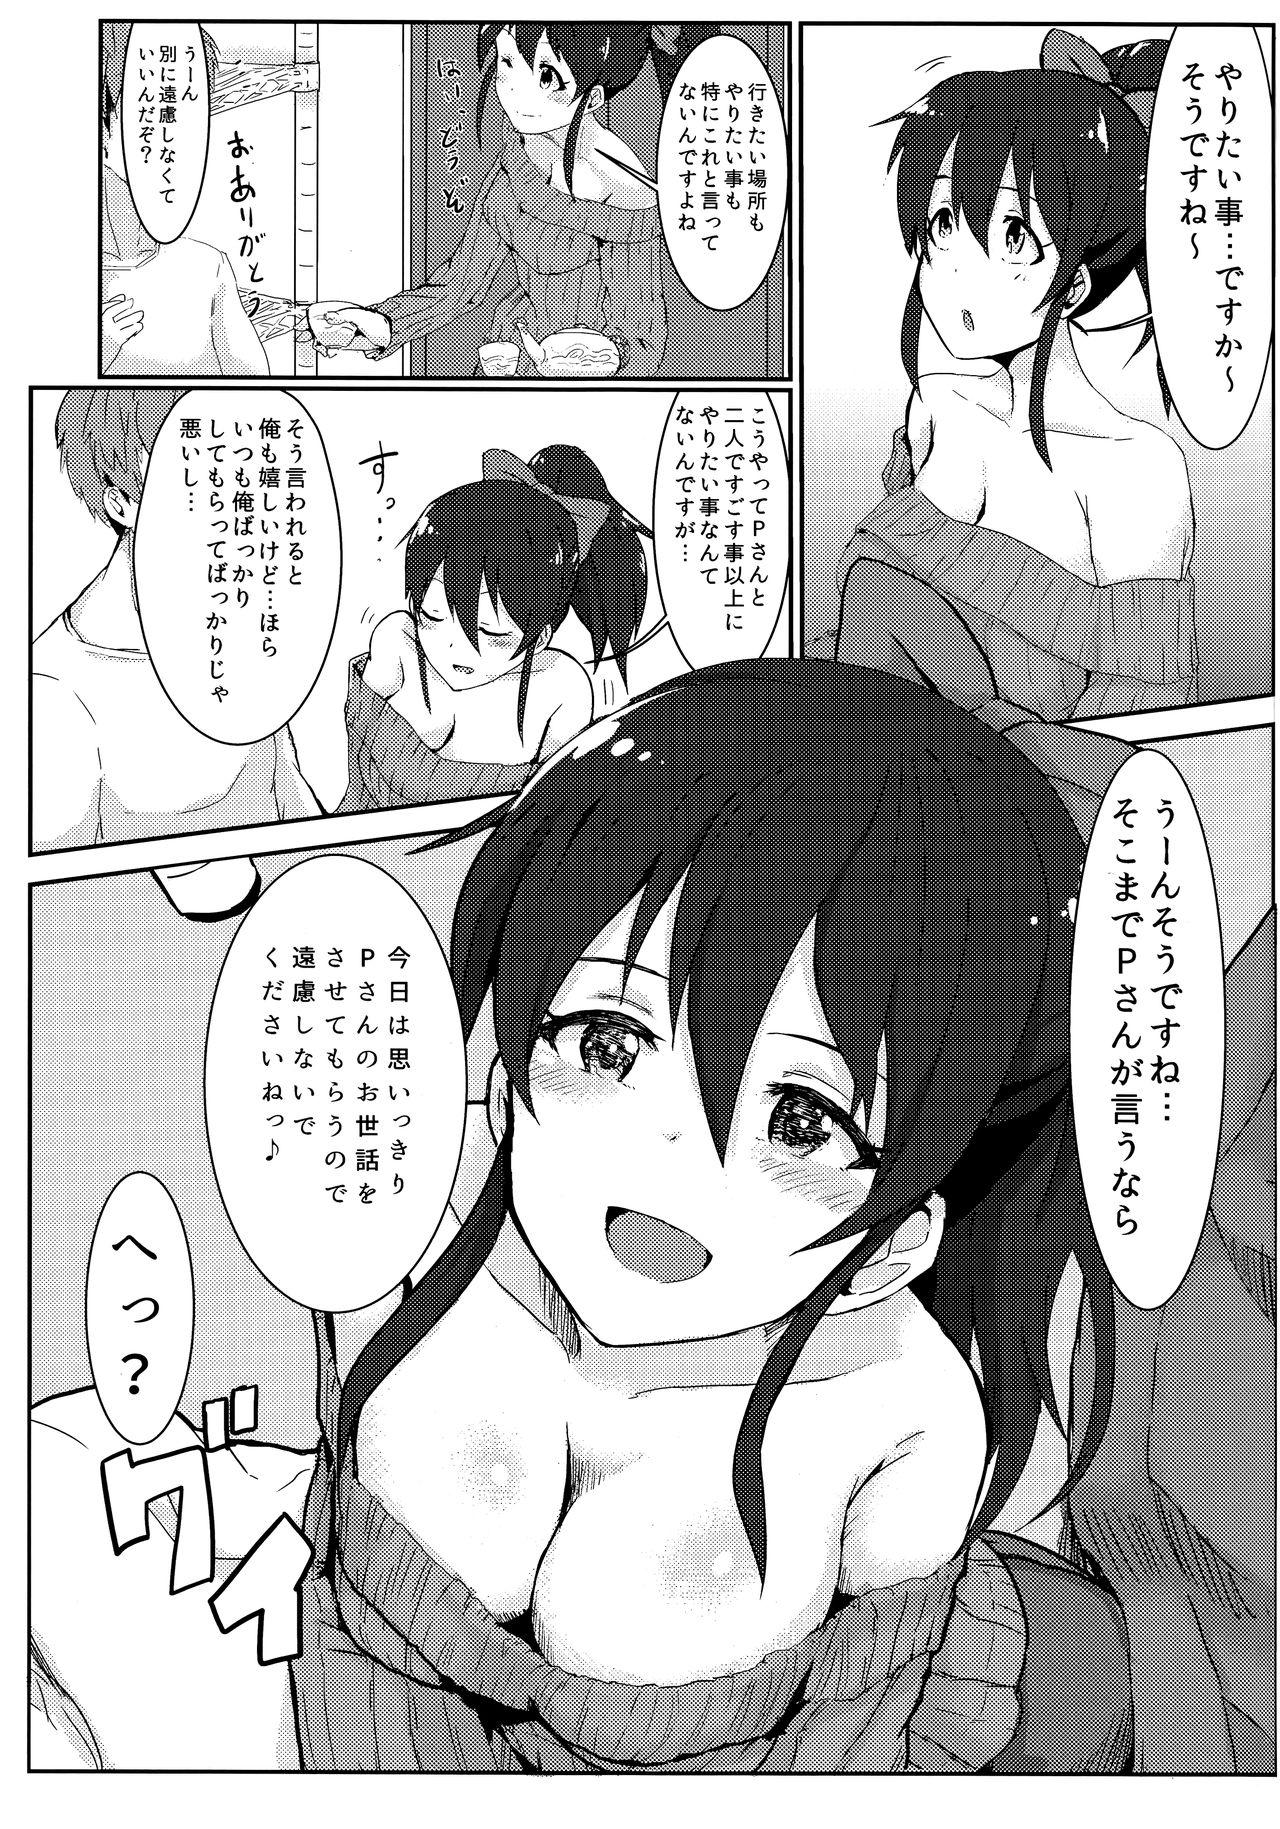 Boots Zutto Issho ga Ii na - The idolmaster Tiny Girl - Page 6